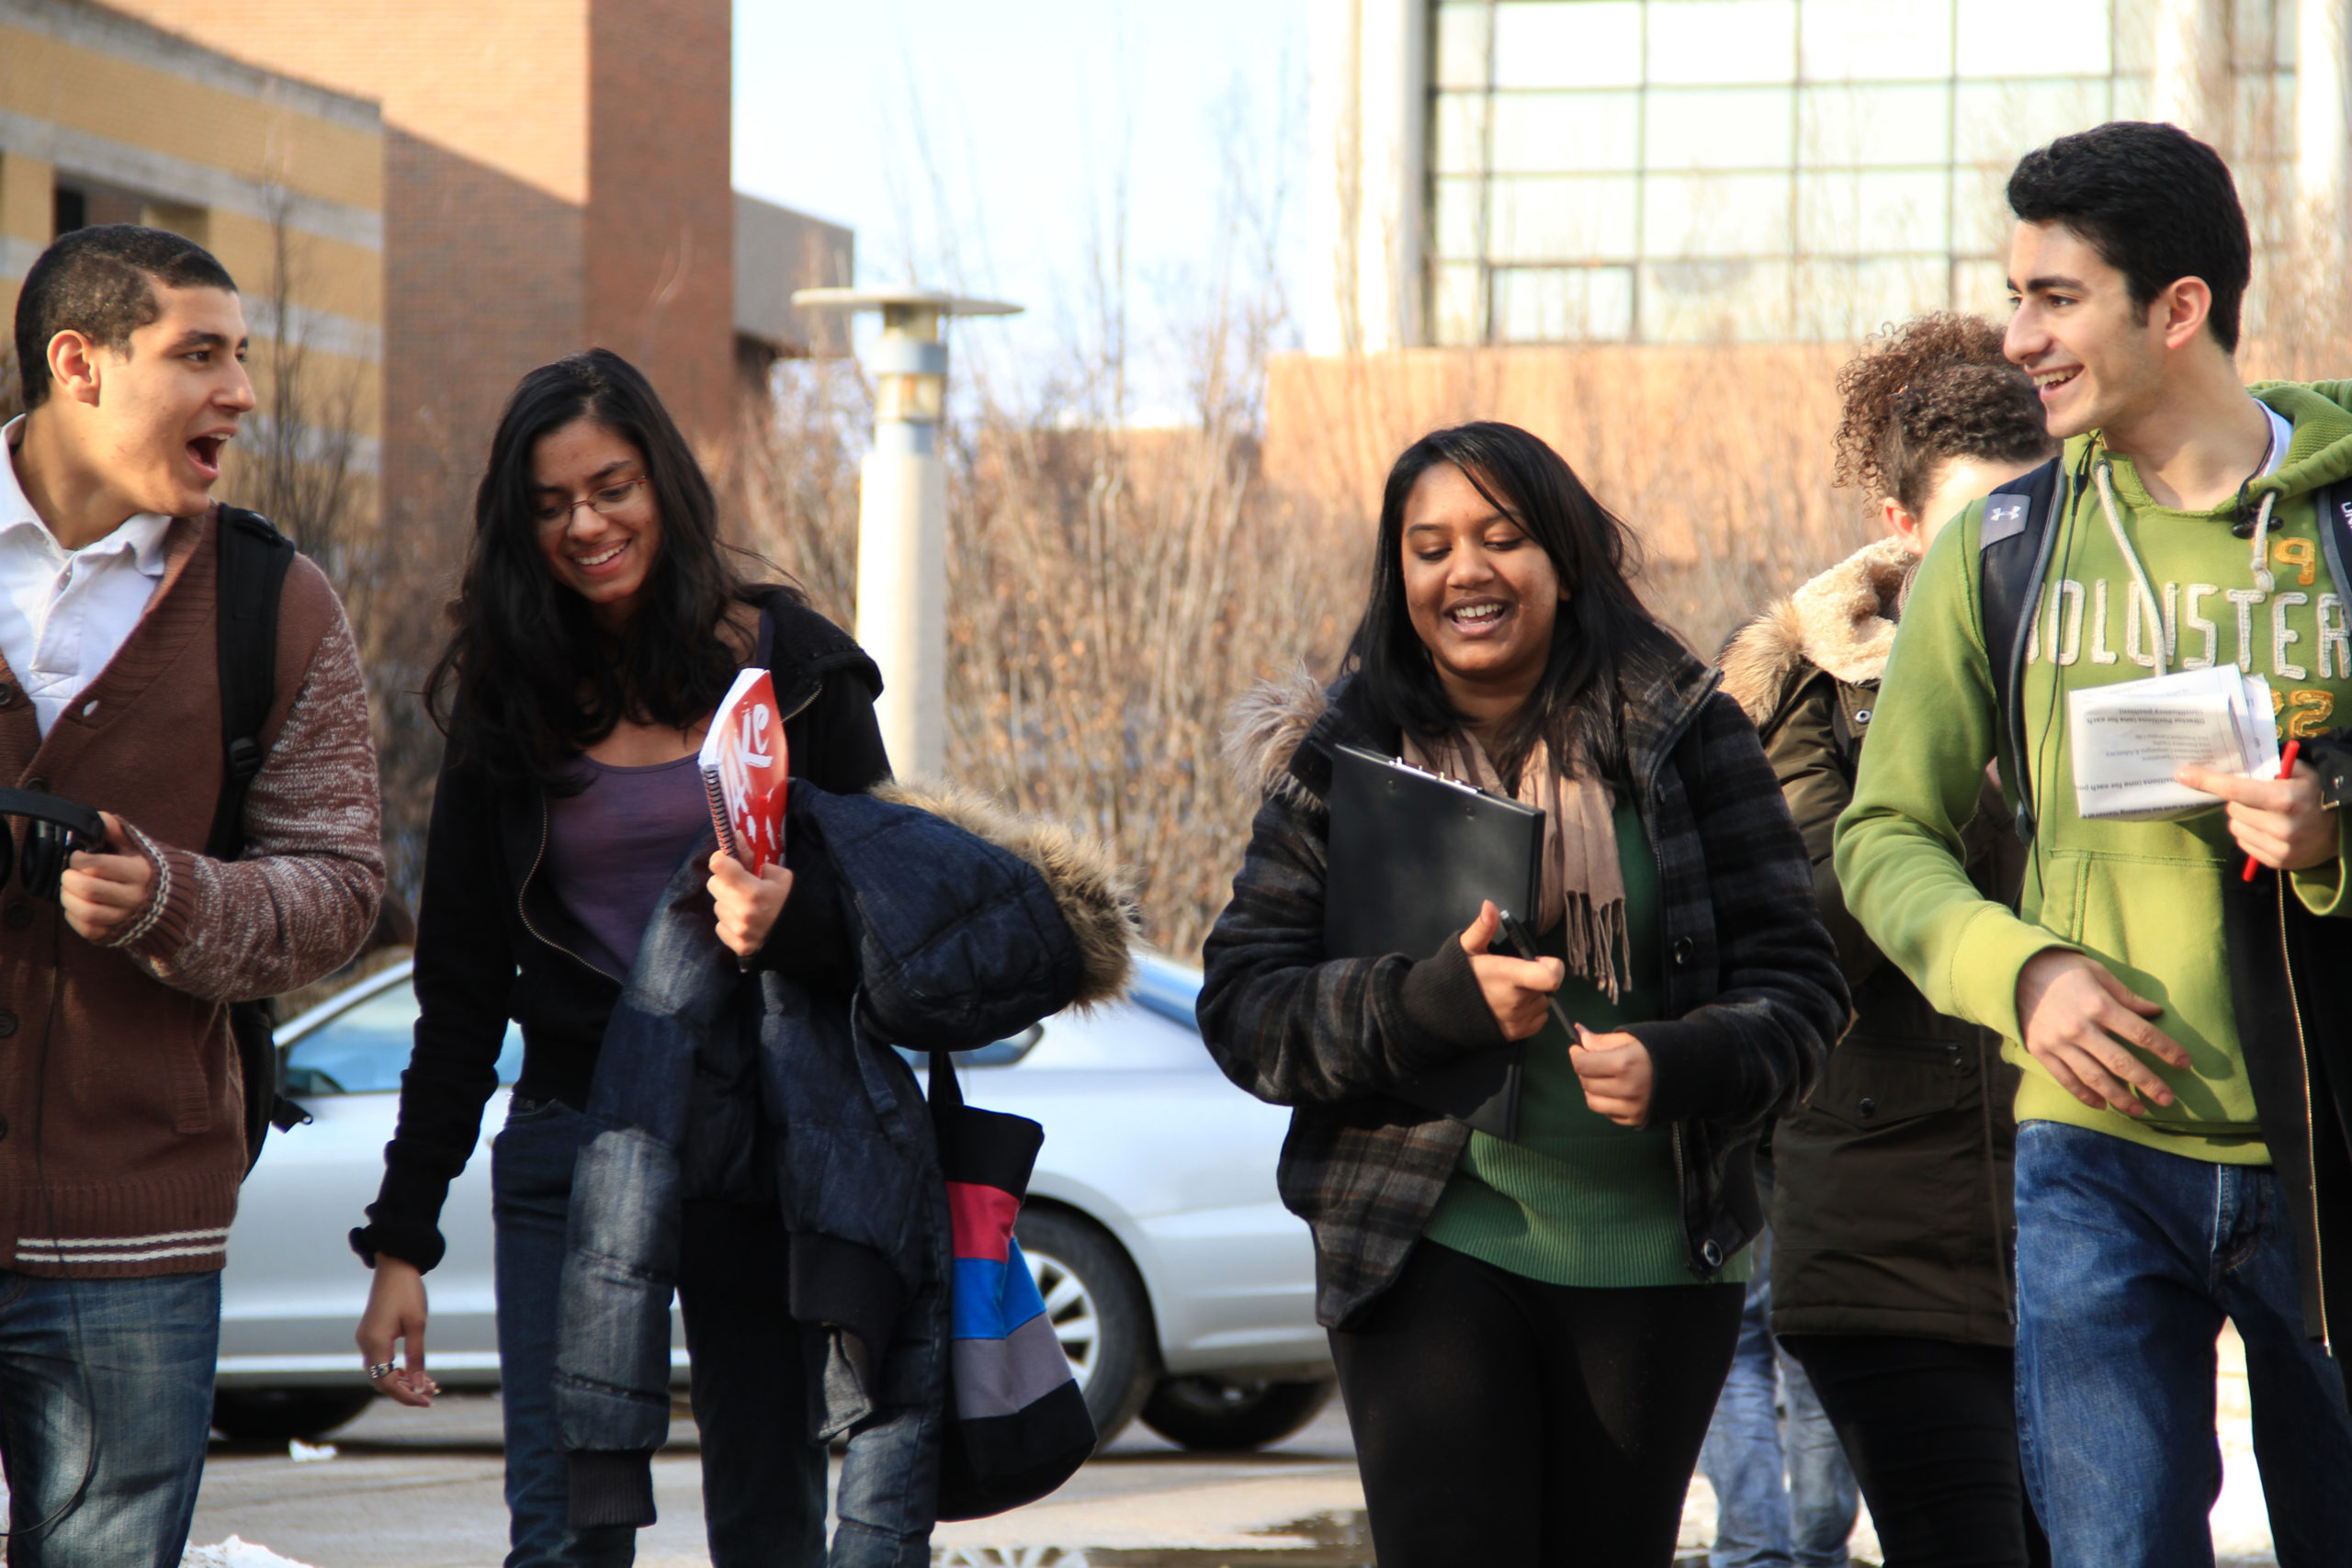 Students walking at the Commons